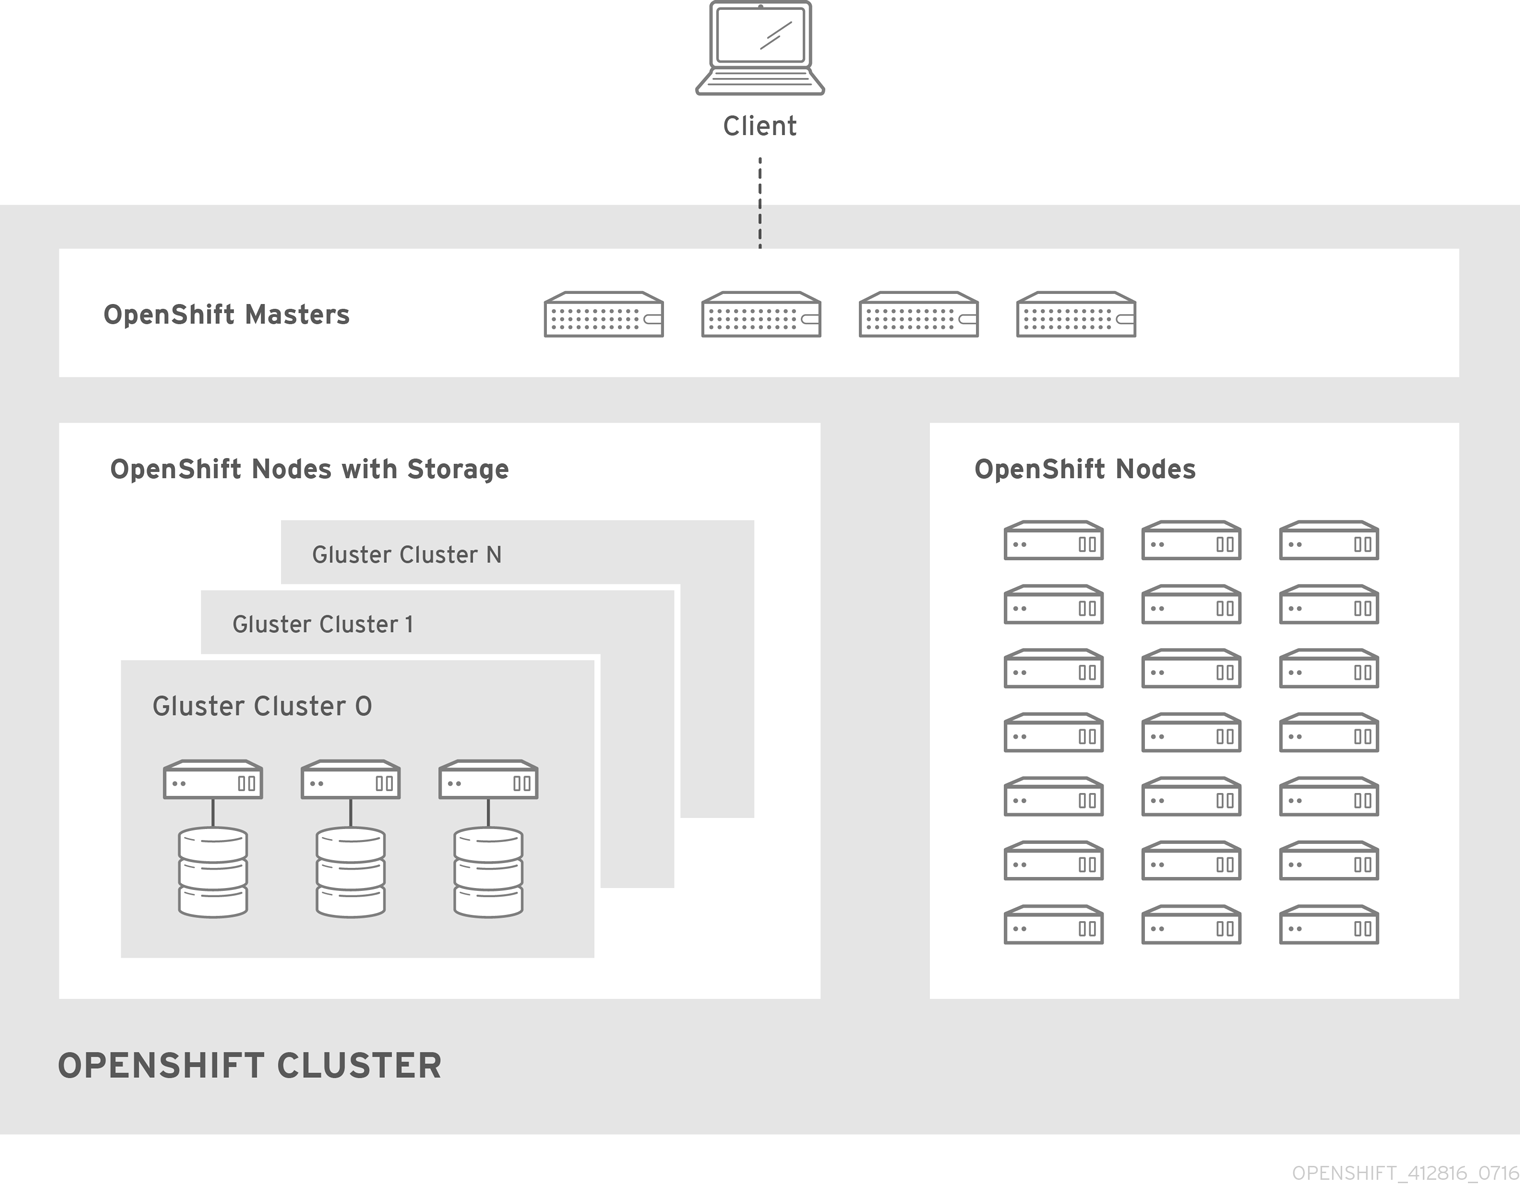 Architecture - Red Hat Gluster Storage Container Converged with OpenShift